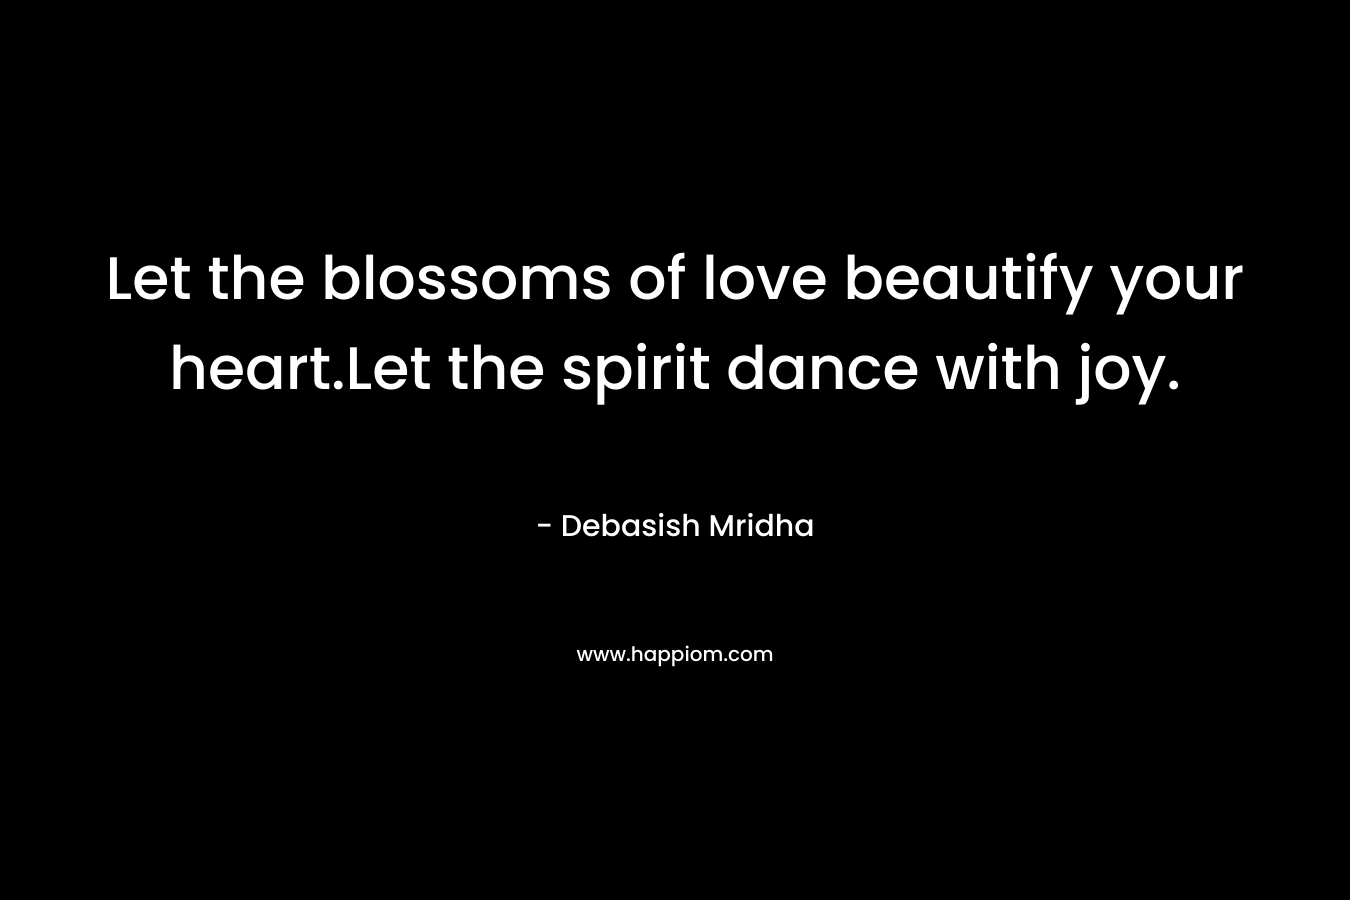 Let the blossoms of love beautify your heart.Let the spirit dance with joy. – Debasish Mridha